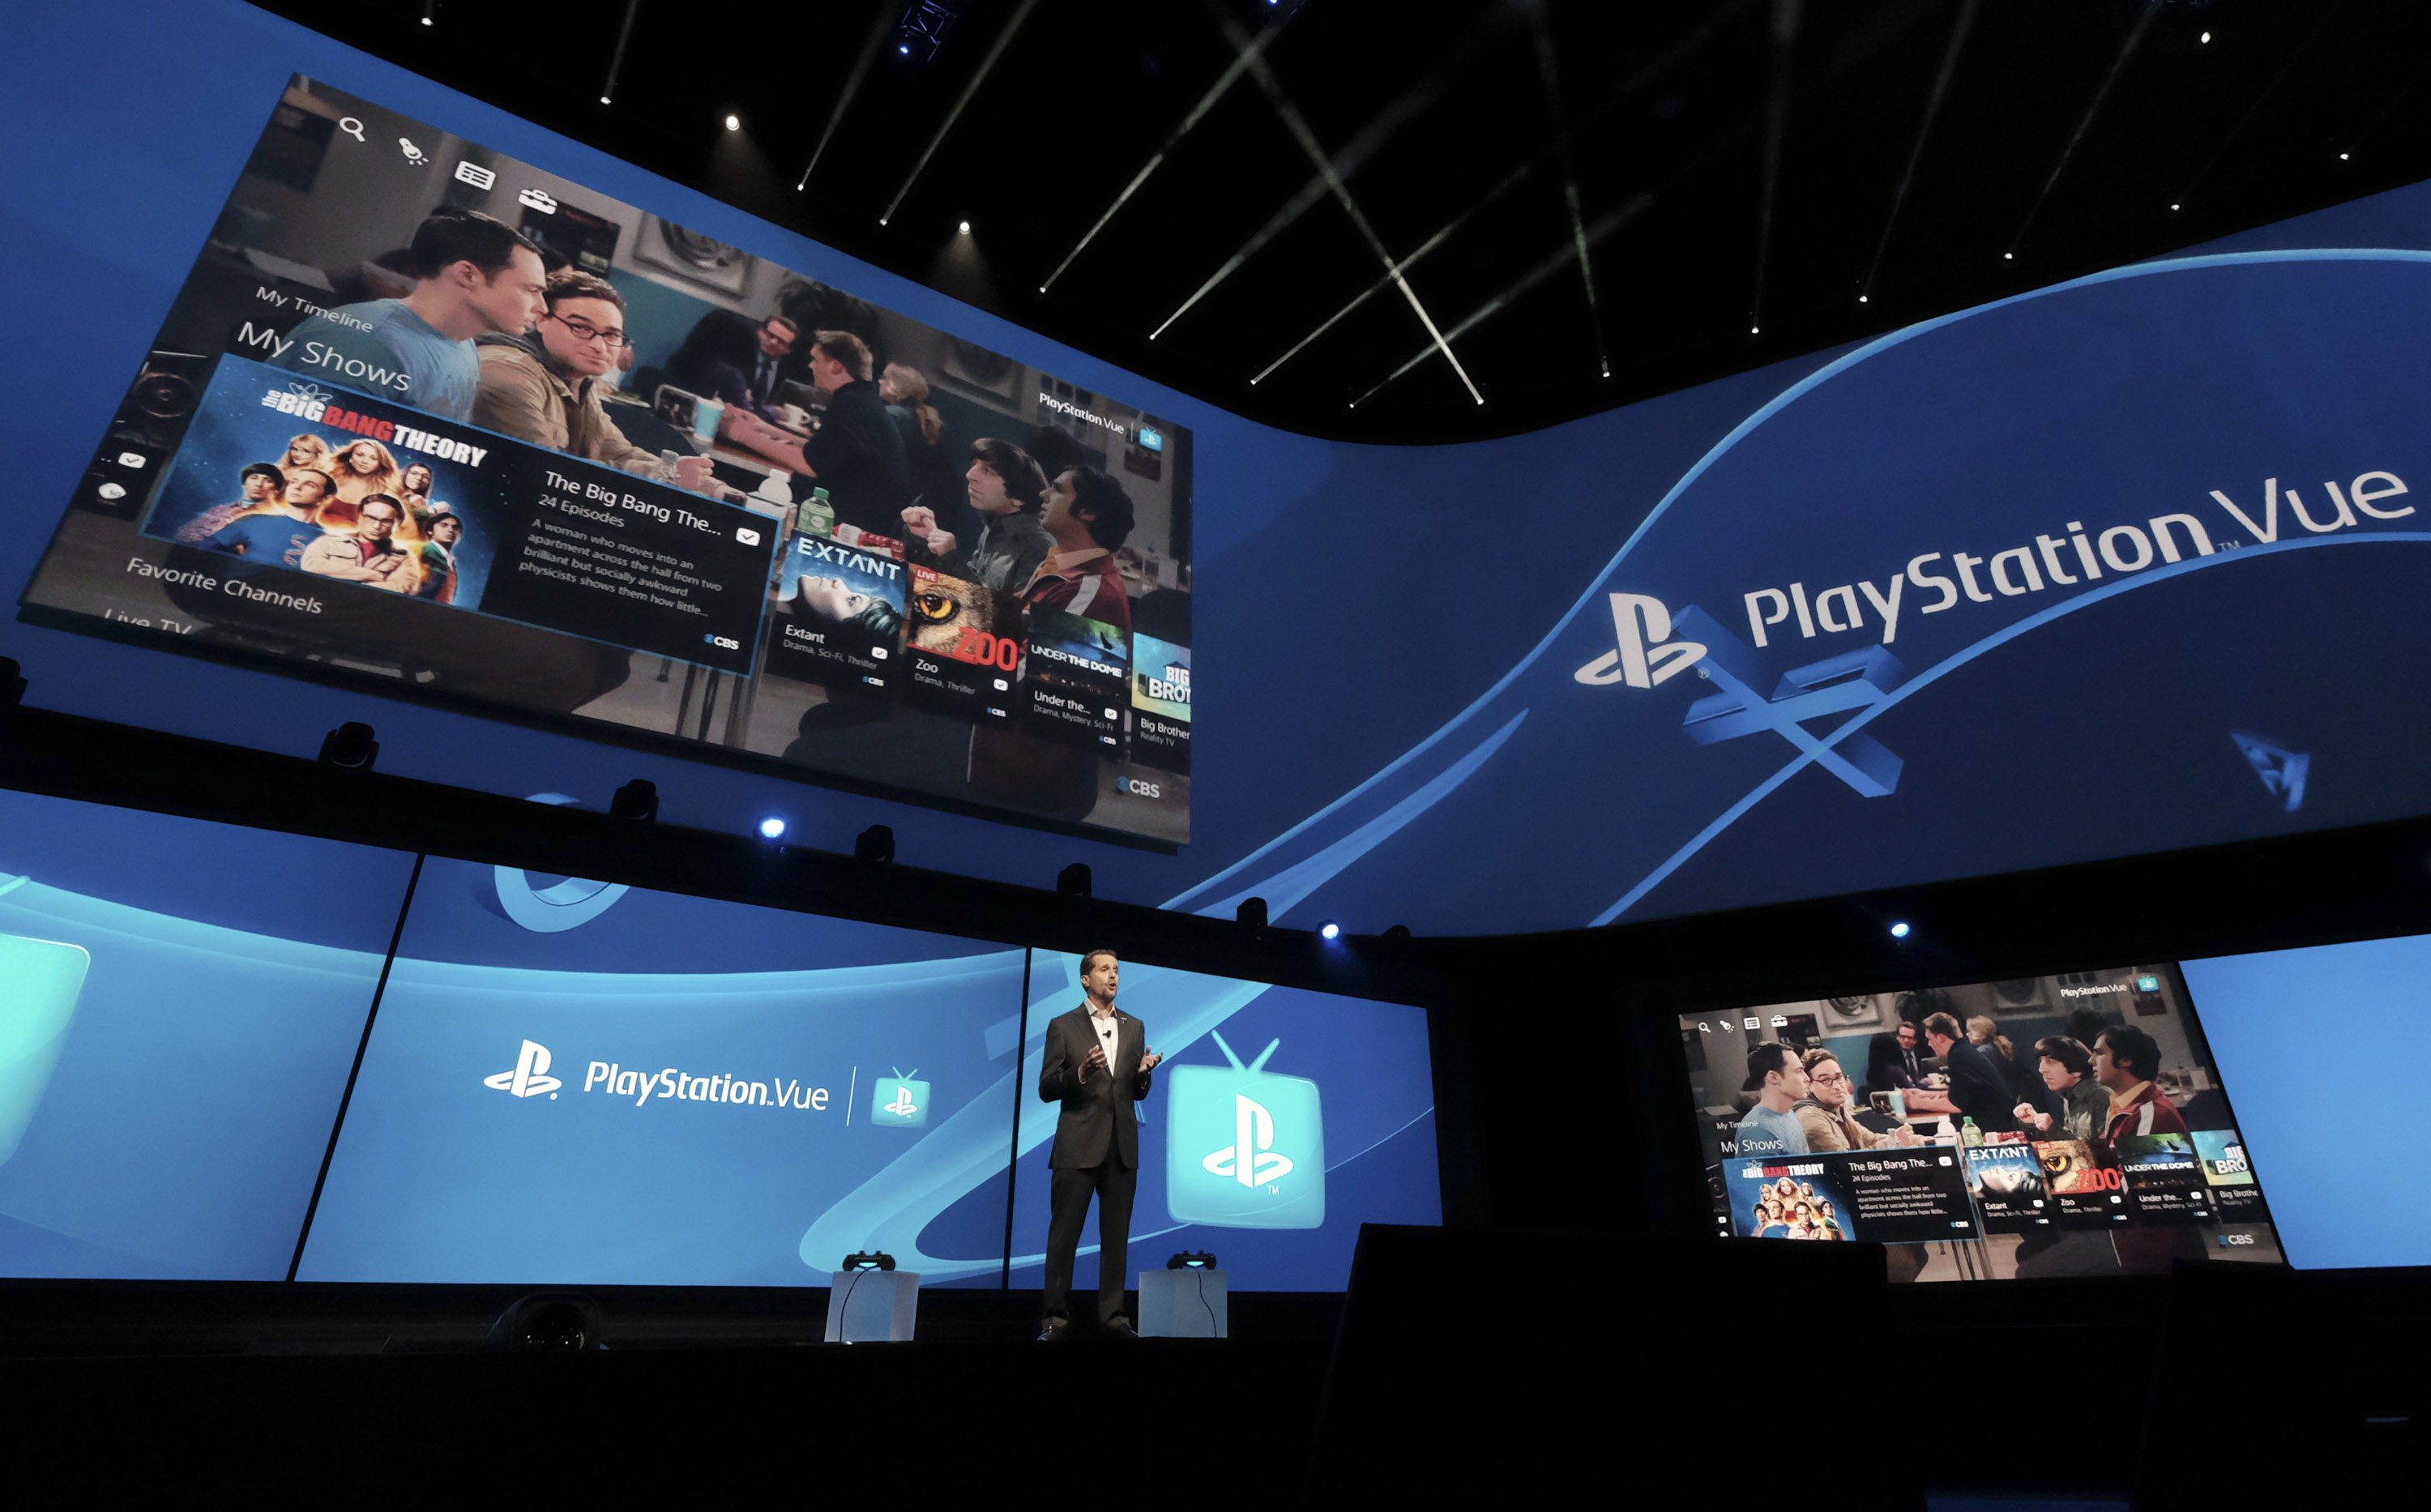 ndrew House, President and Global CEO of Sony Computer Entertainment Inc., announces the launch of PlayStation Vue in the Greater Los Angeles and San Francisco Bay Area TV markets, as well as a-la-carte offerings nationwide at PlayStation's E3 2015 Press Conference on Monday June 15, 2015 in Los Angeles, California. (Chris Weeks—Getty Images for Sony Computer A)